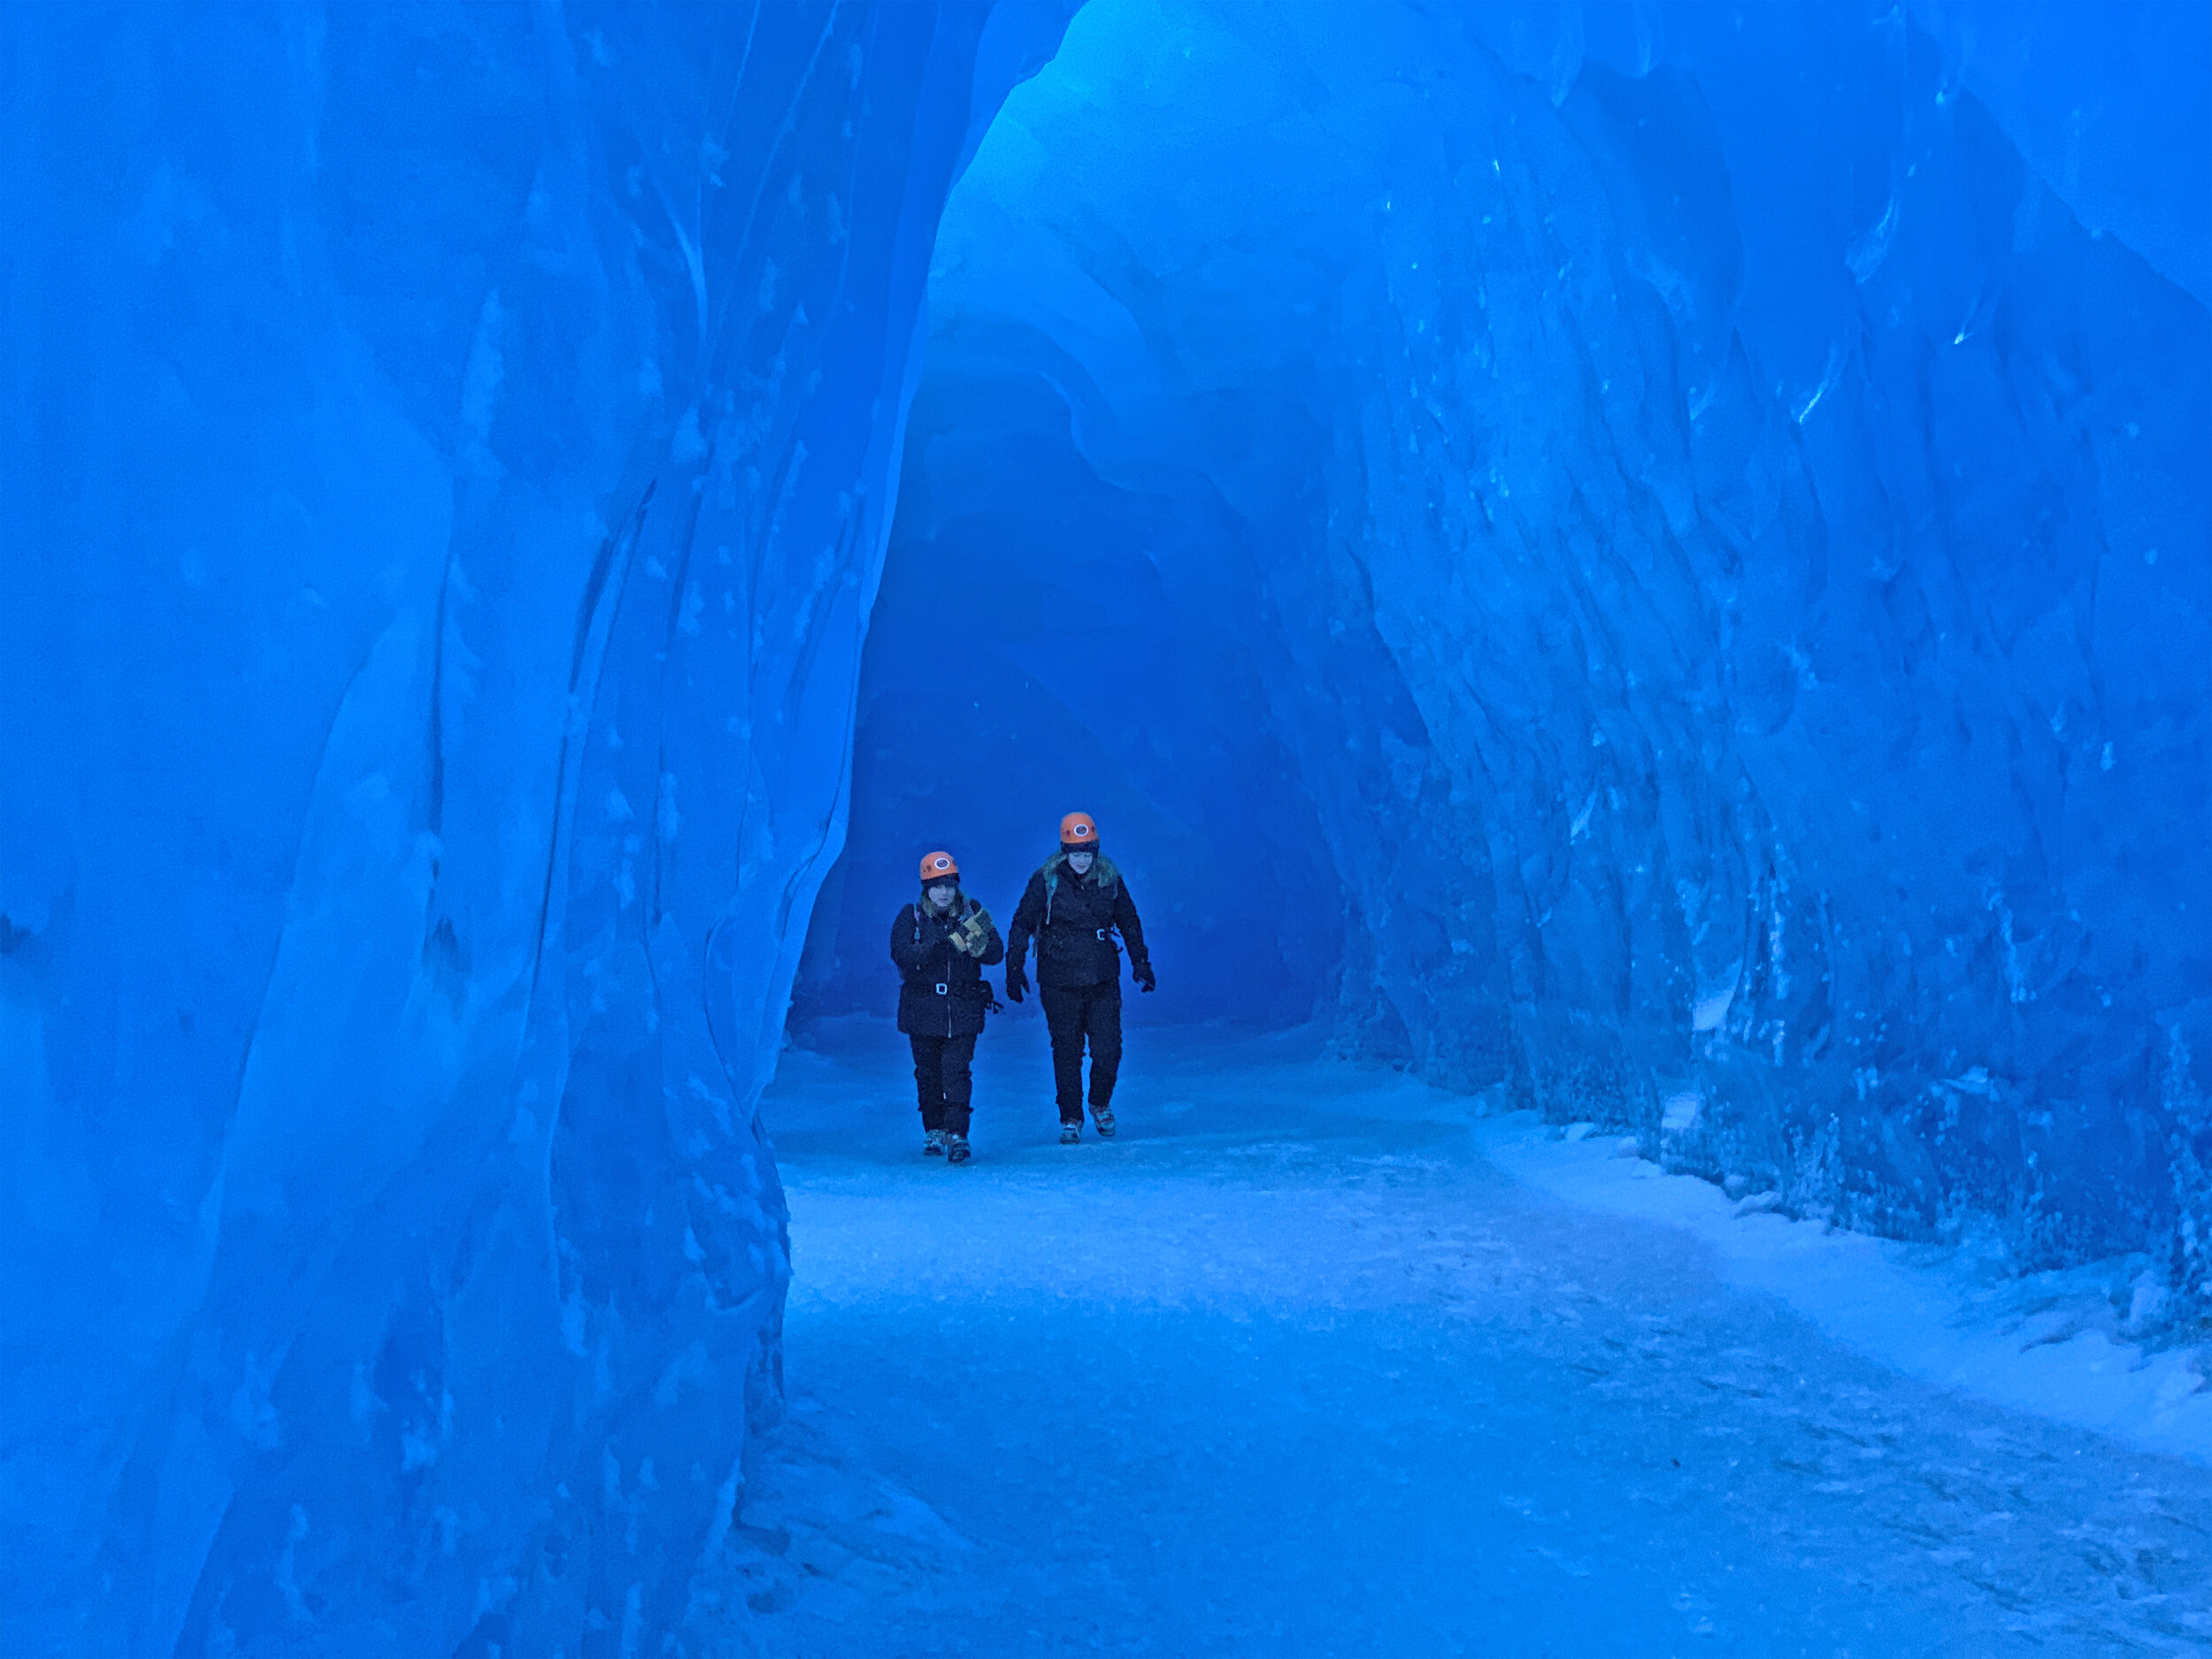  People walking in an ice cave  